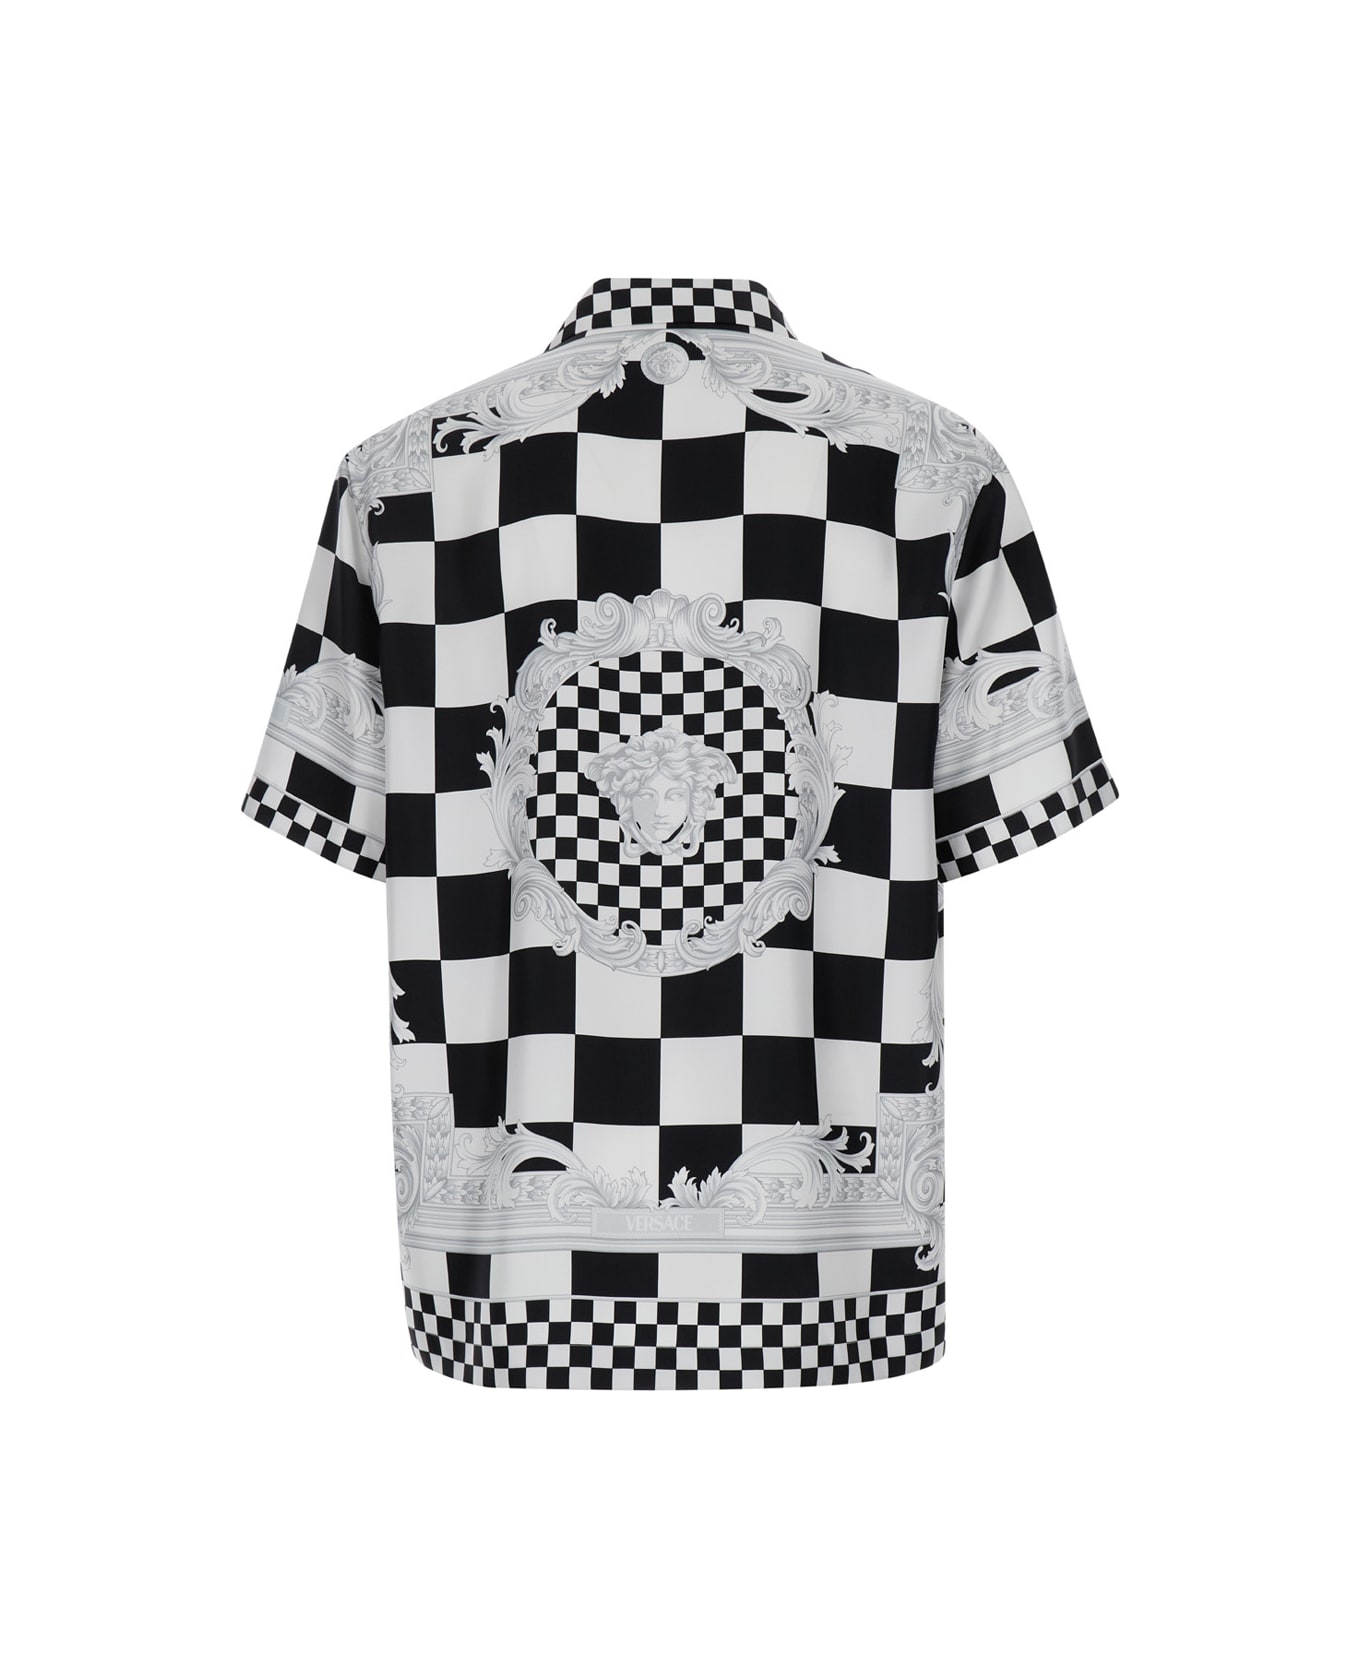 Versace Black And White Shirt With Baroque Print In Techno Fabric Man - White/black